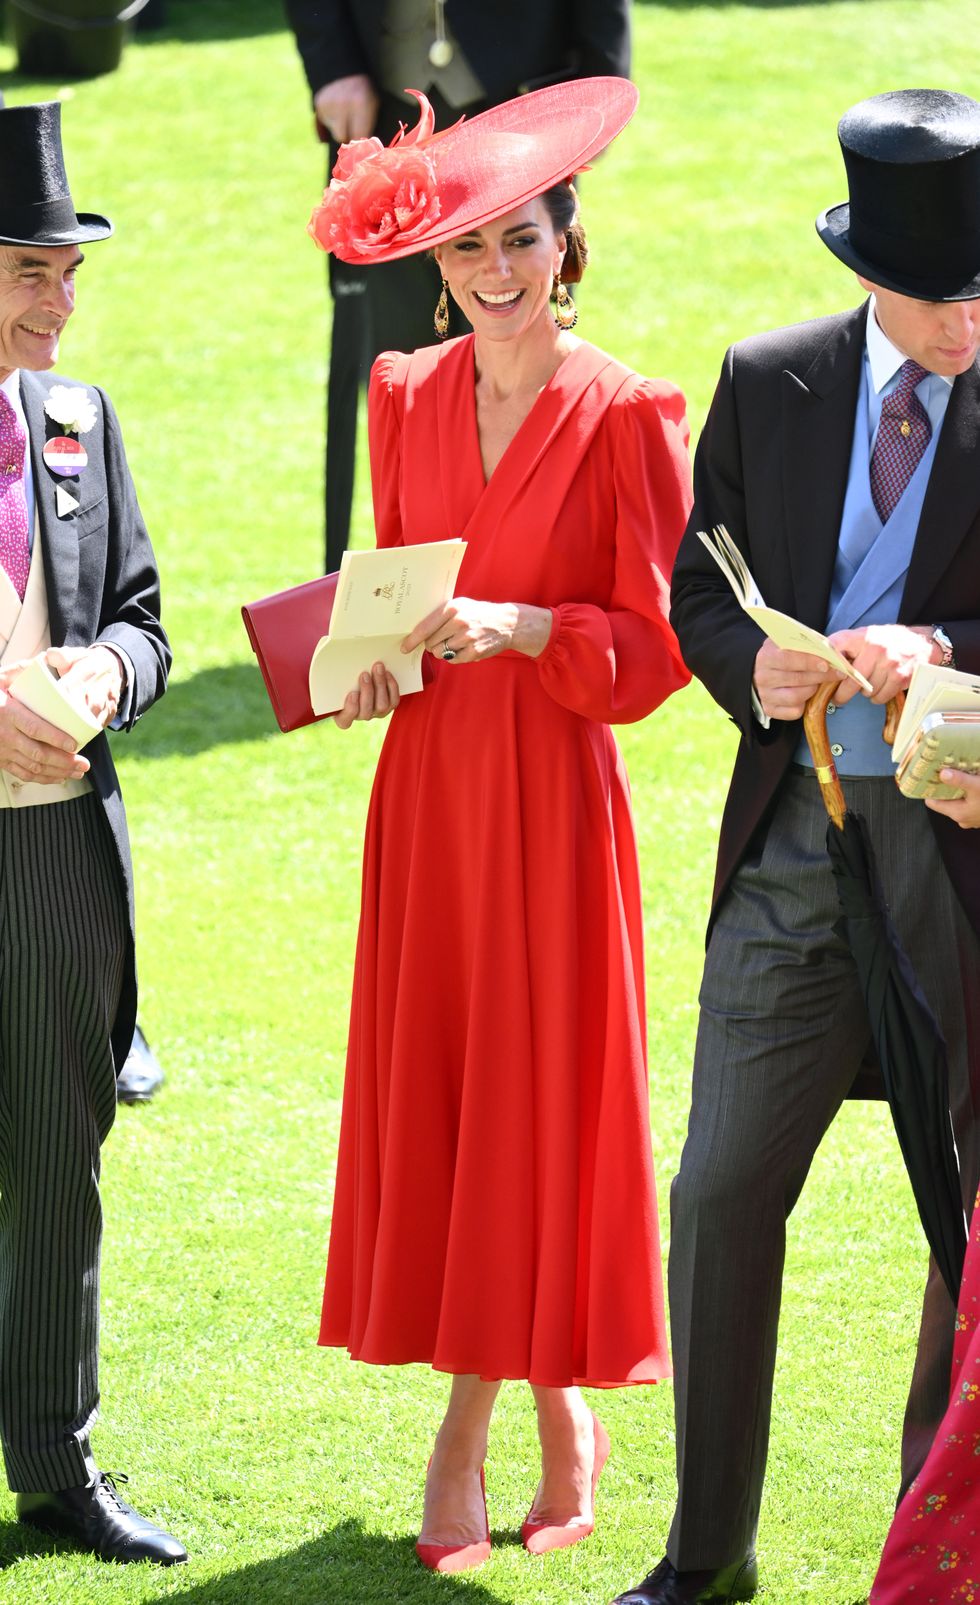 Kate Middleton Wears Red Dress and Hat for First Royal Ascot as Princess